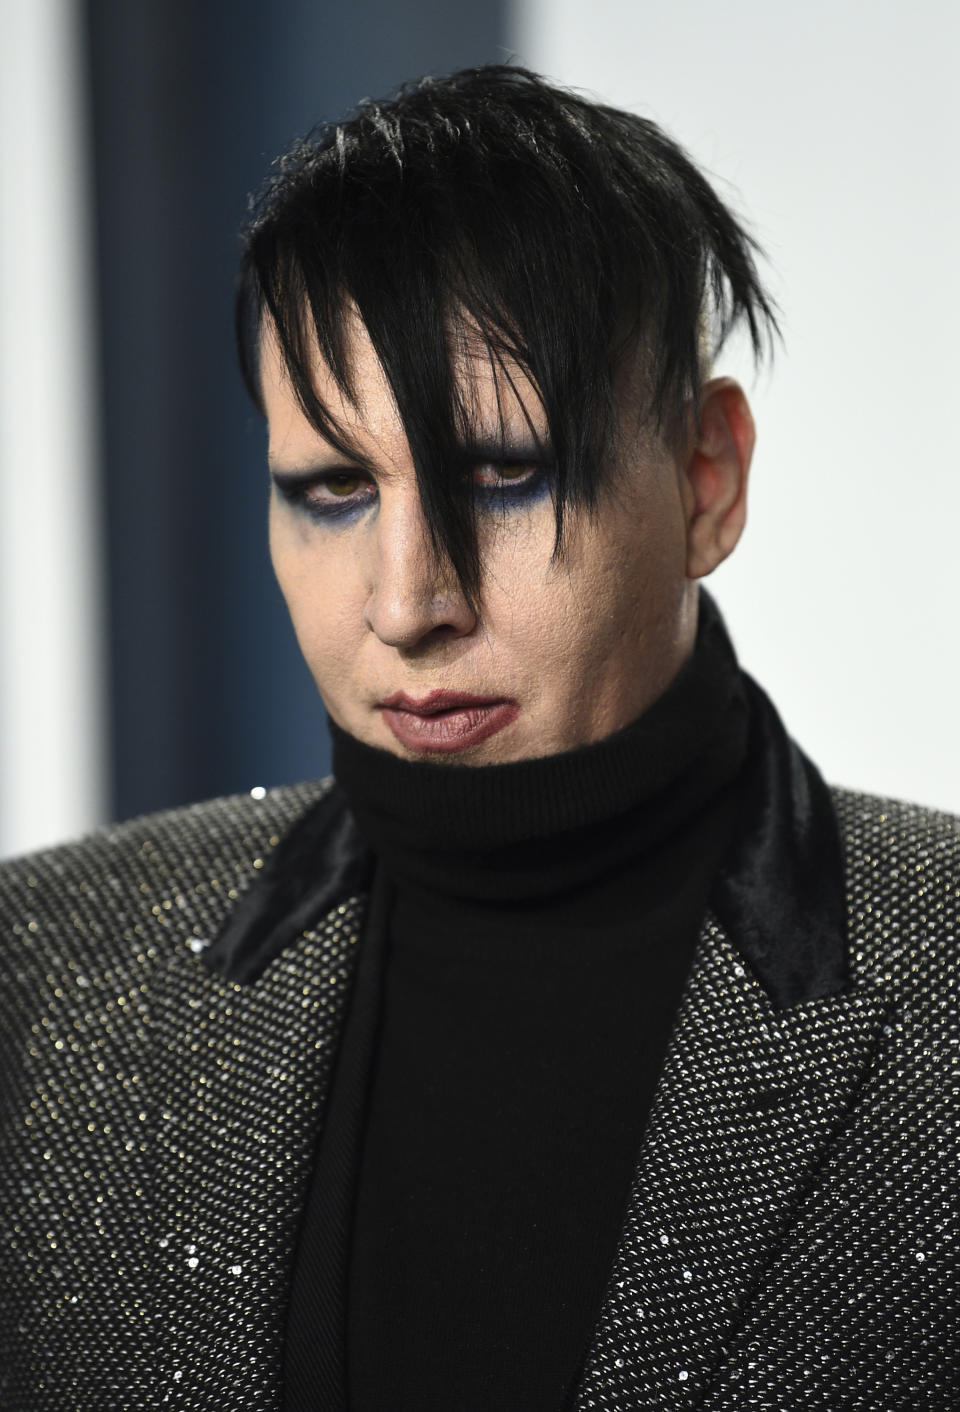 FILE - Marilyn Manson arrives at the Vanity Fair Oscar Party on Feb. 9, 2020, in Beverly Hills, Calif. Manson was dropped by his record label Monday after his ex-fiancé, the actor Evan Rachel Wood, accused him of sexual and other physical abuse. (Photo by Evan Agostini/Invision/AP, File)